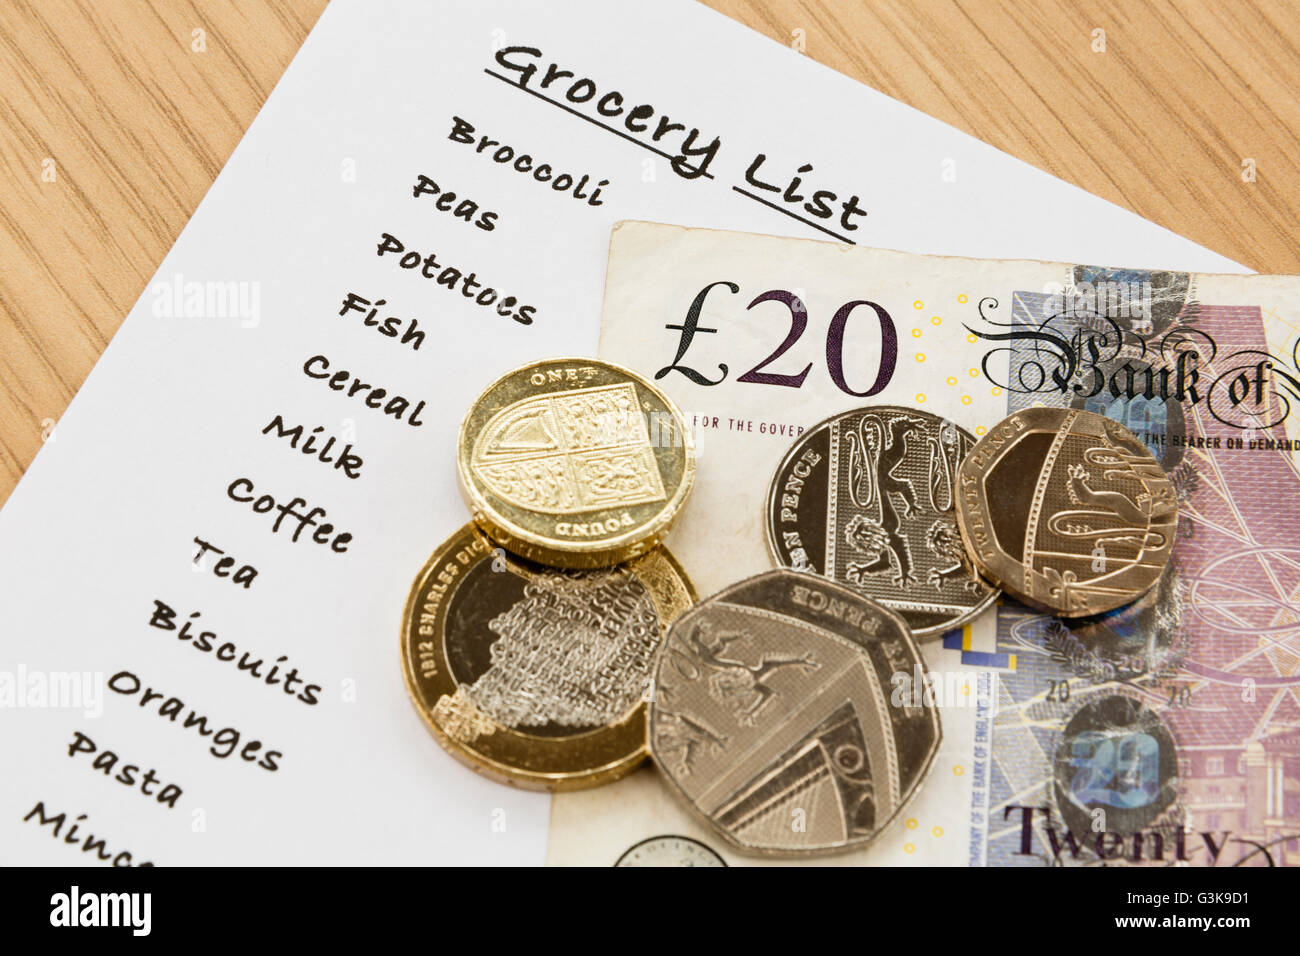 Shopping list for groceries with sterling money cash from above. England, UK, Britain Stock Photo